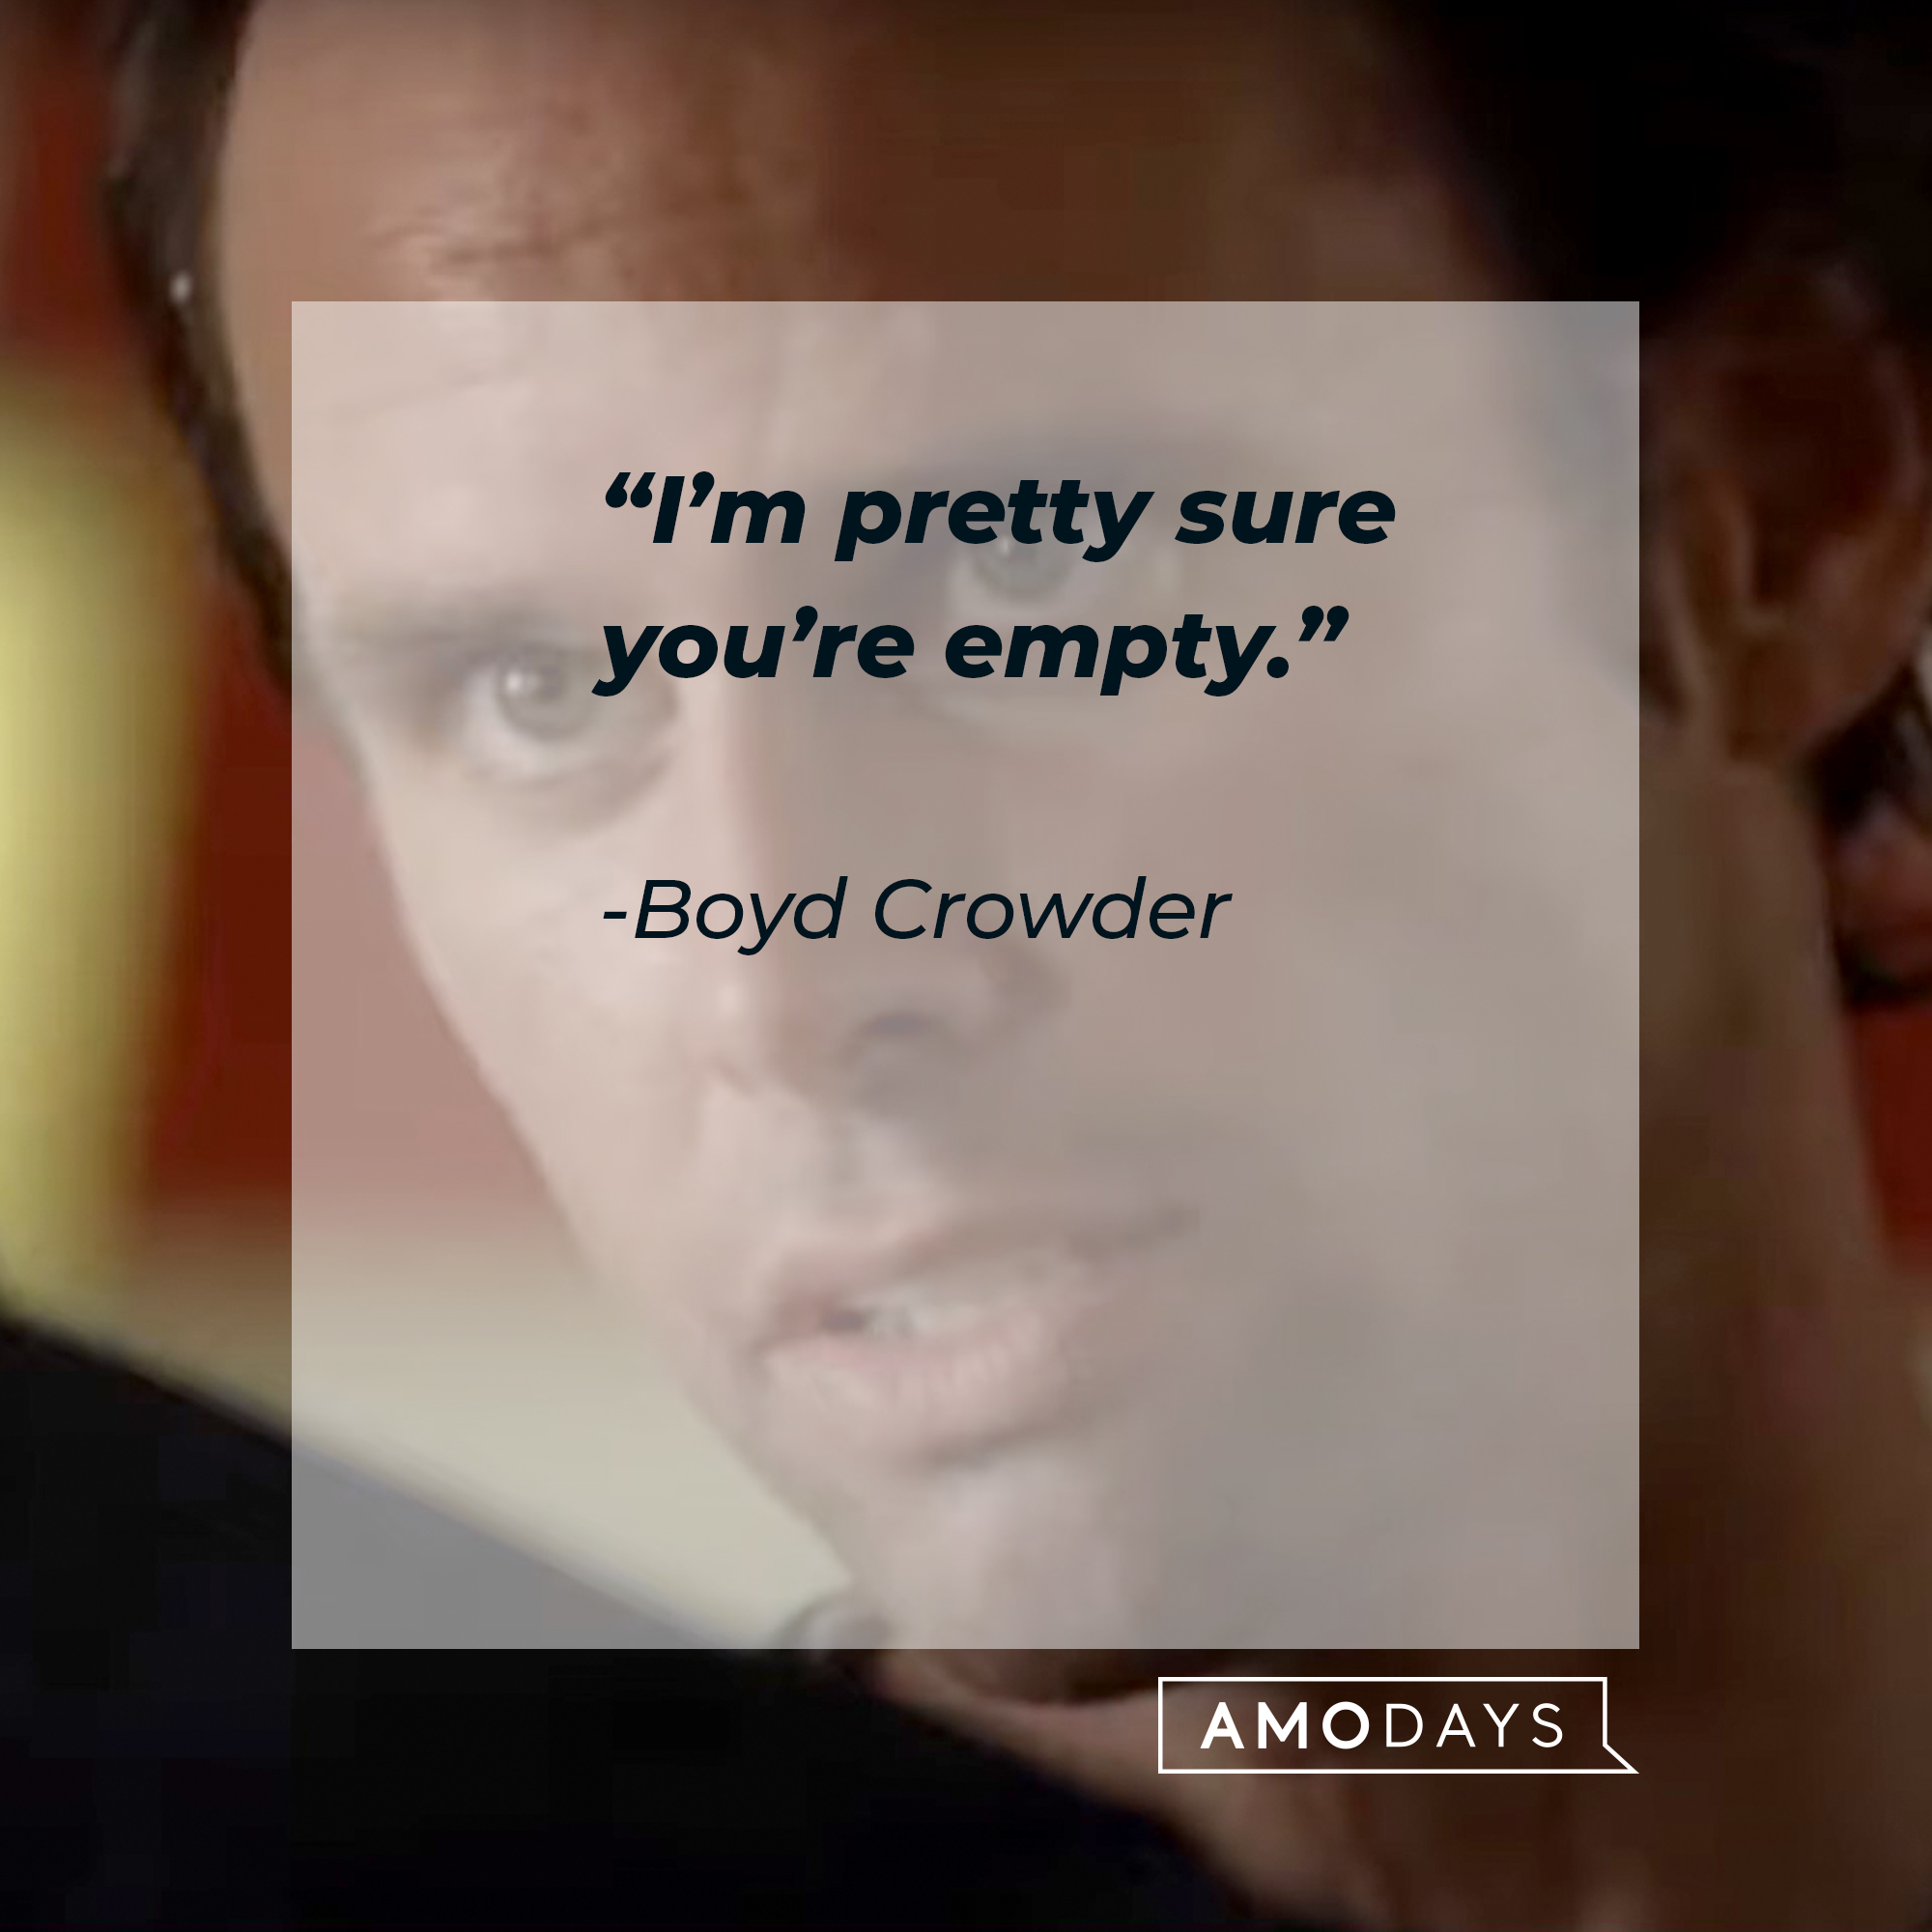 An image of  Boyd Crowder with his quote: “I’m pretty sure you’re empty.” | Source: youtube.com/FXNetworks